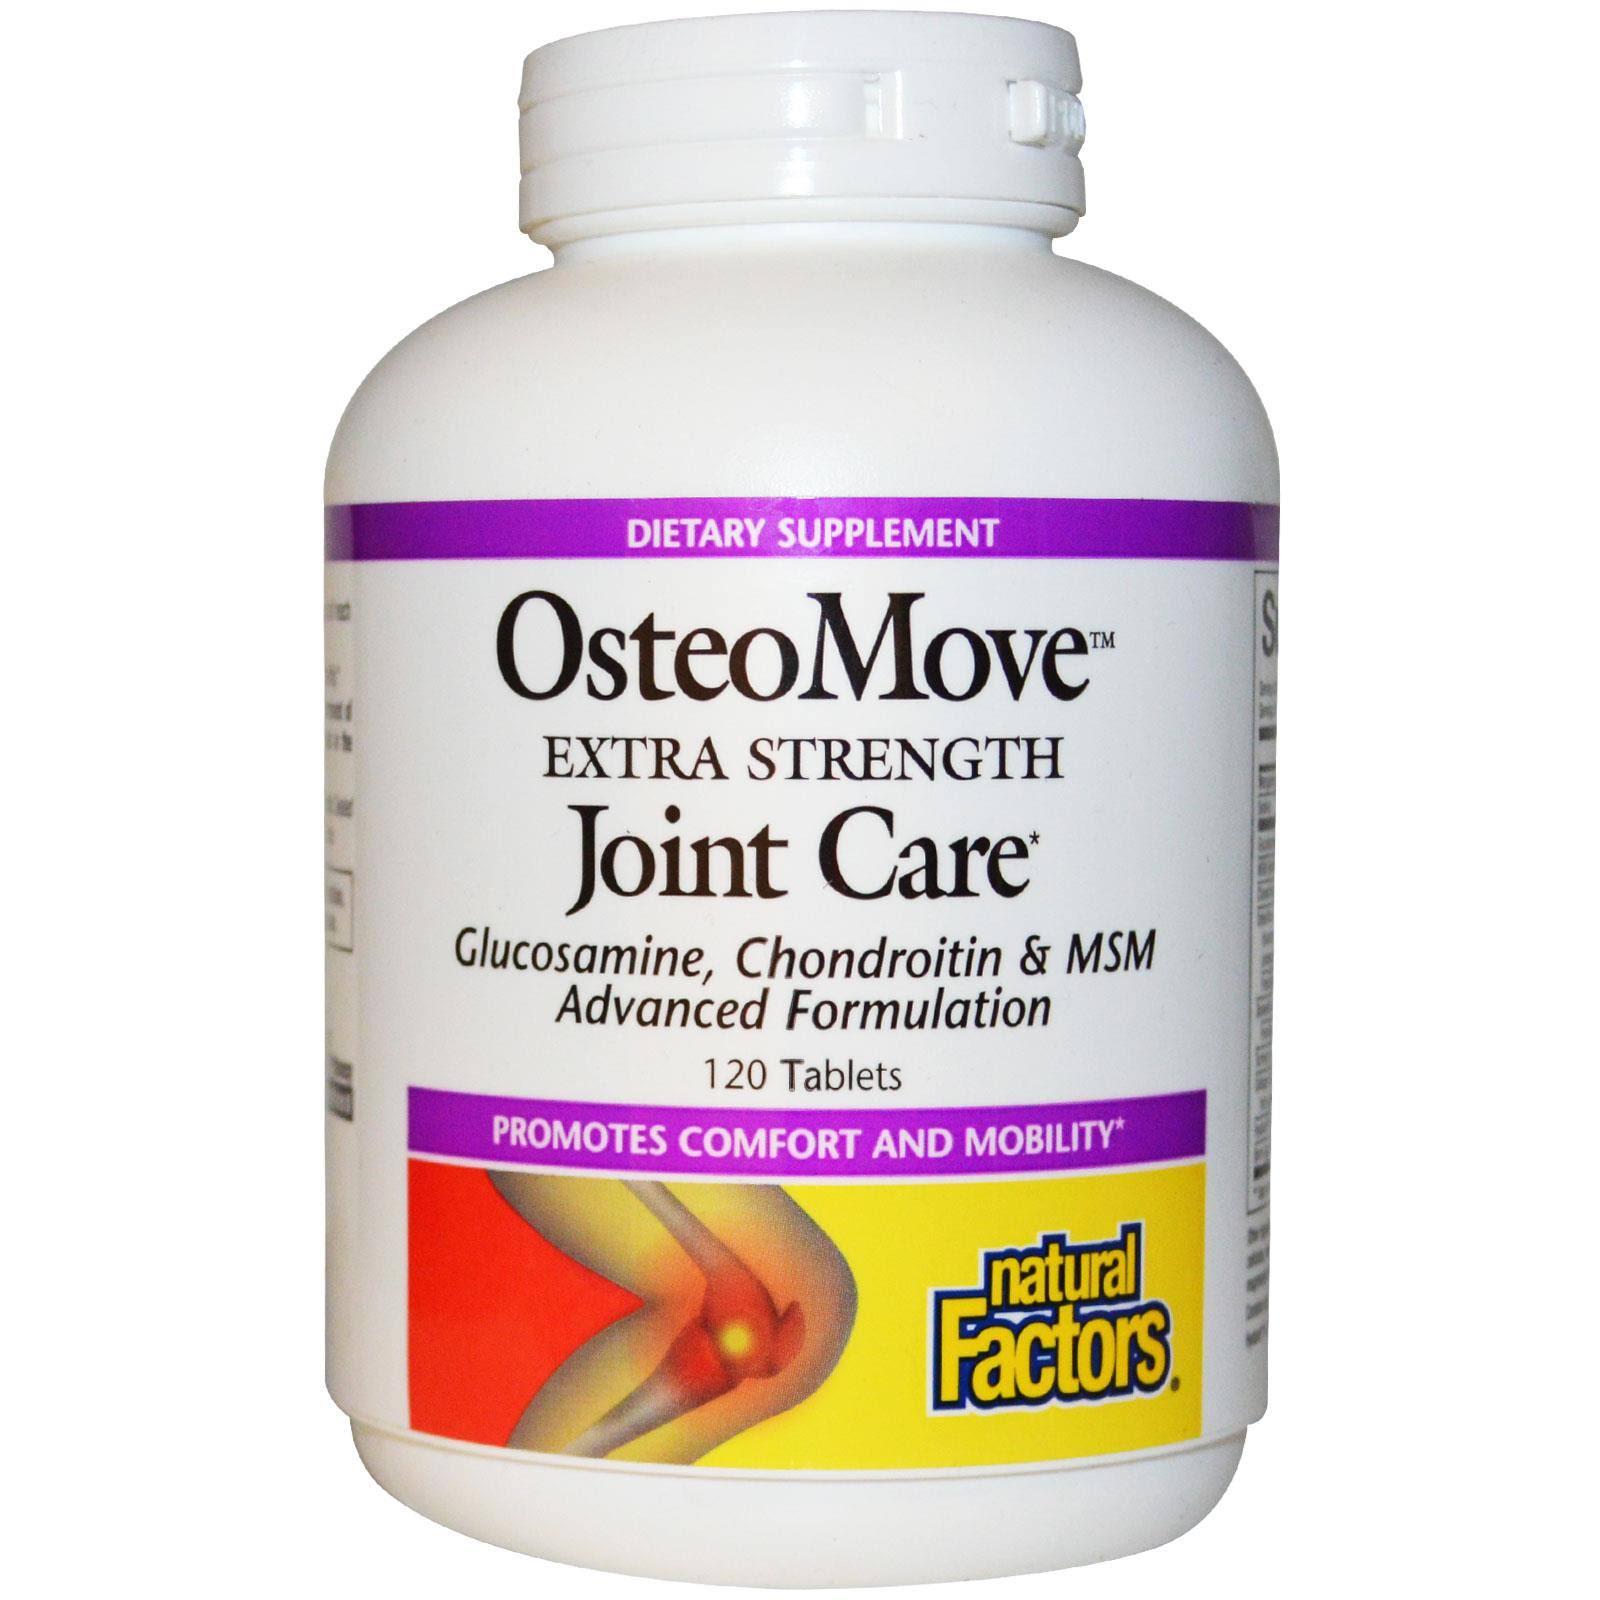 OsteoMove Extra Strength Joint Care - 120 Tablets